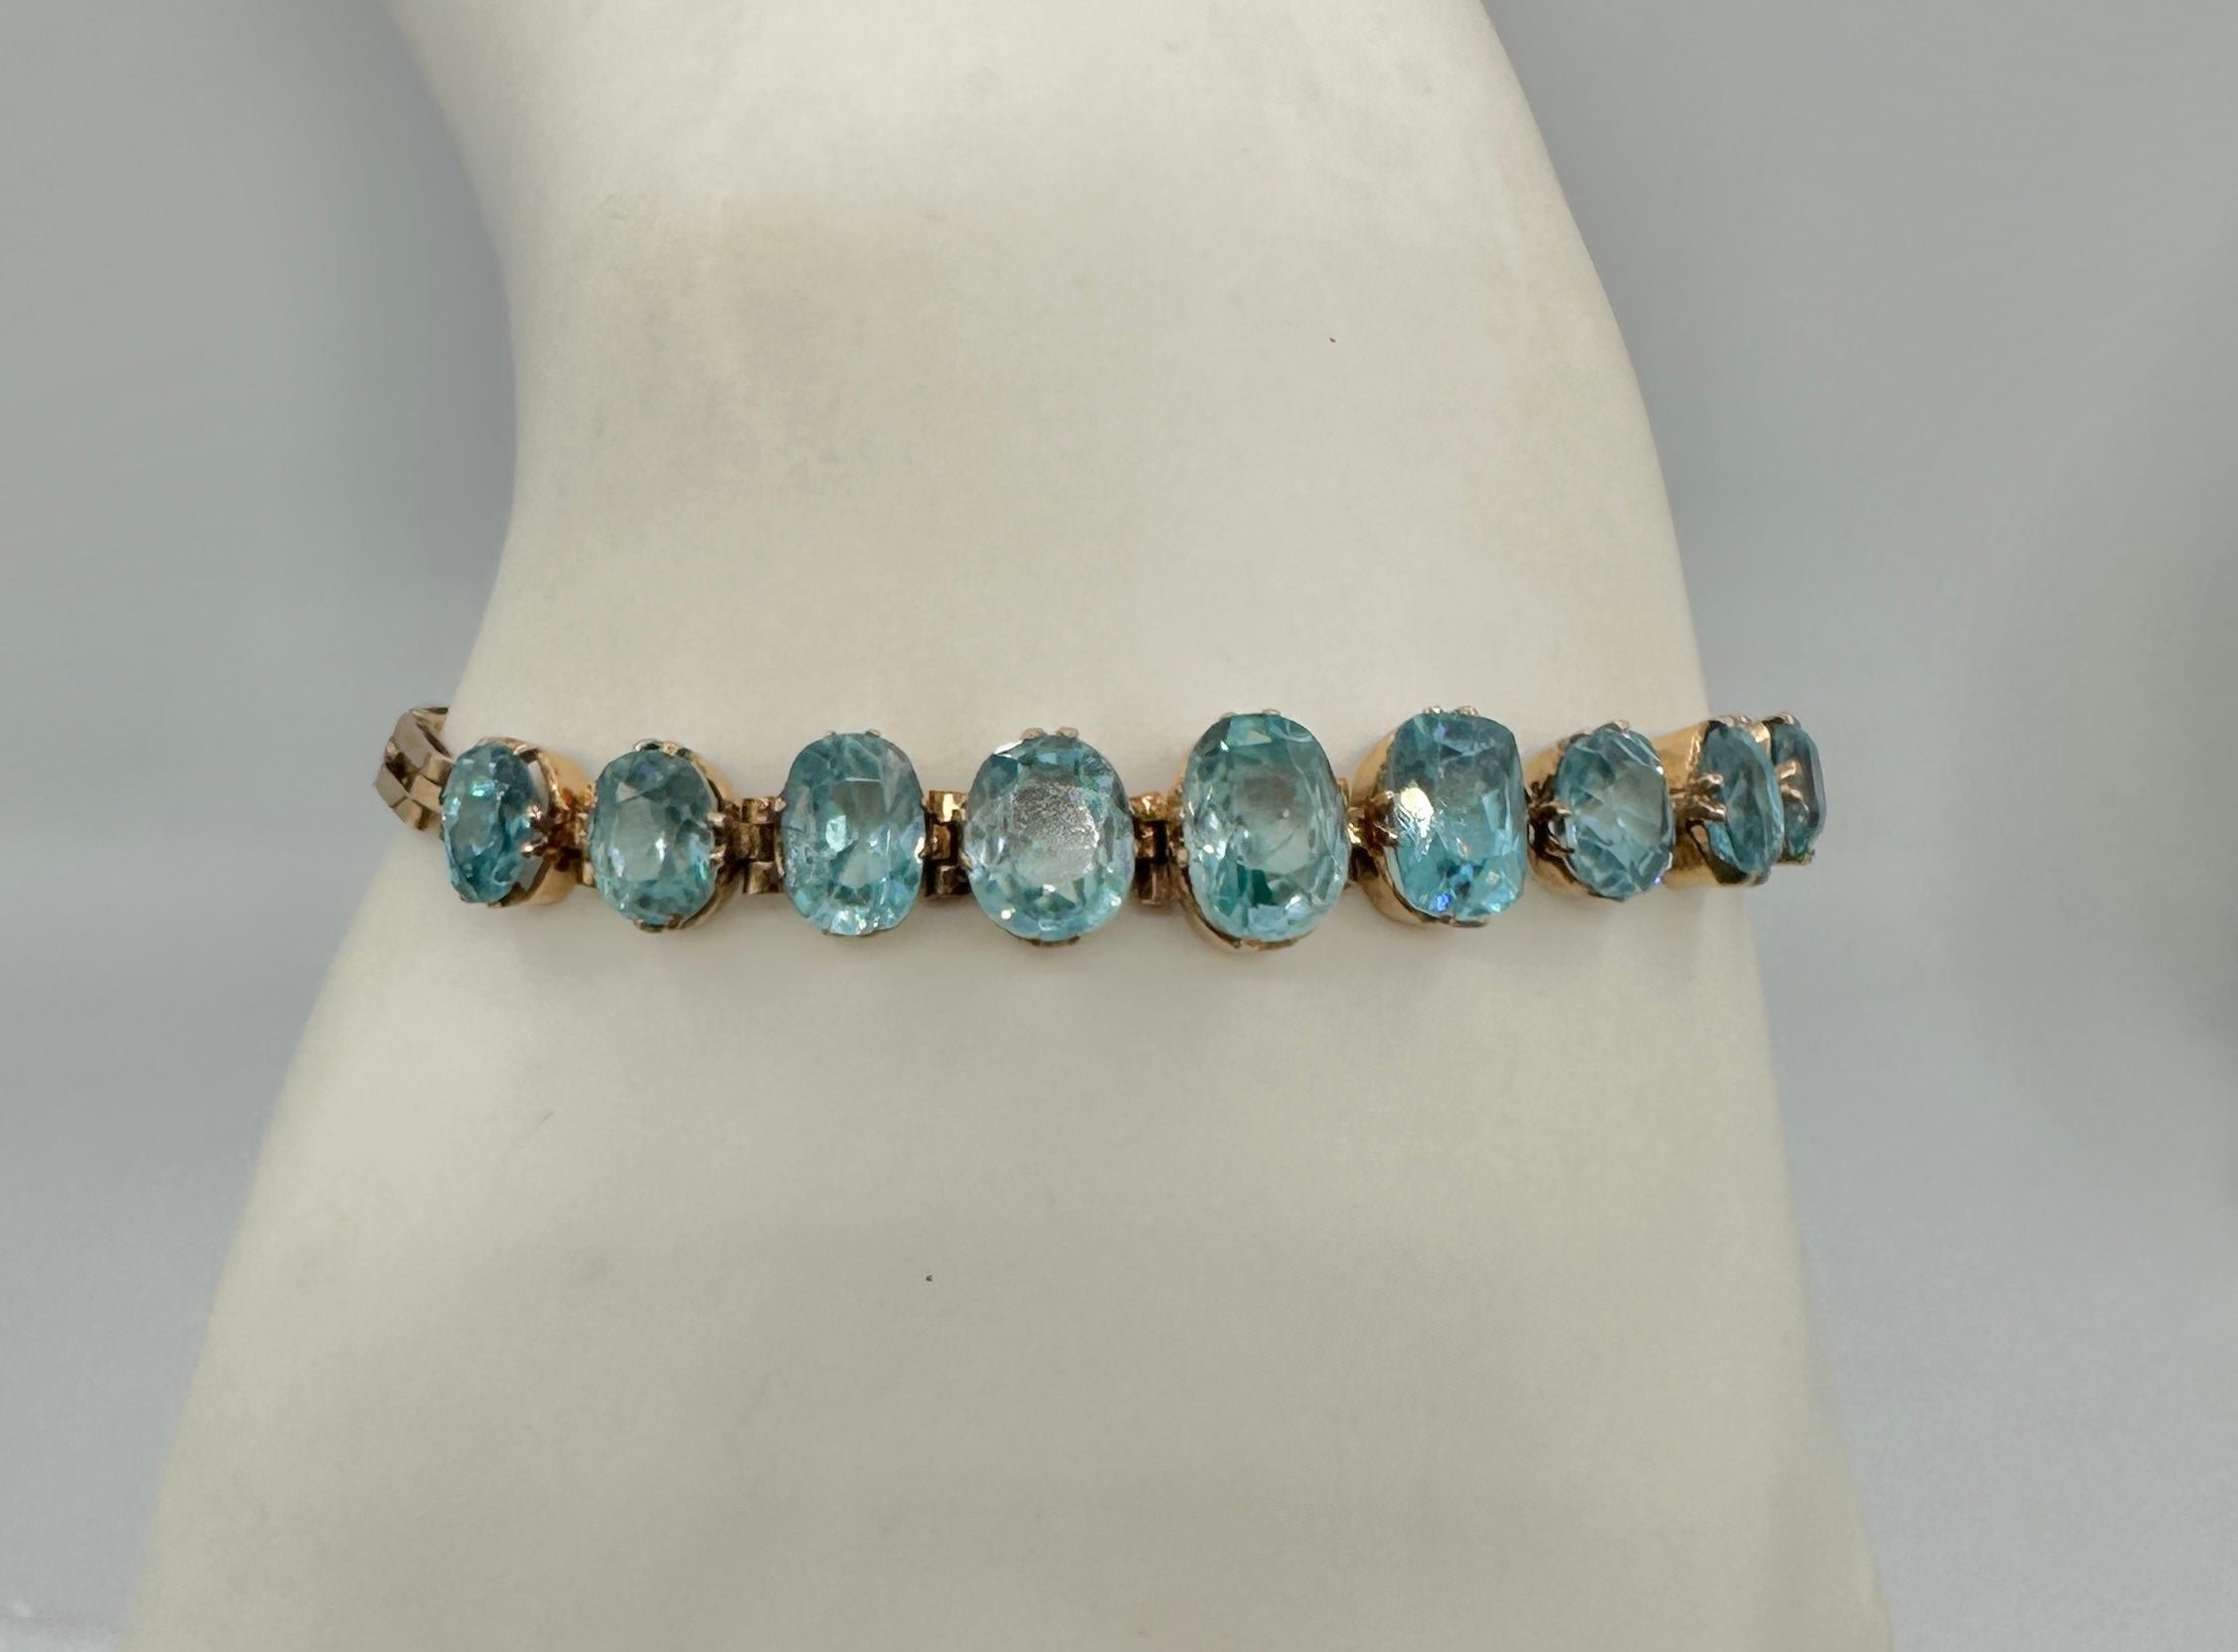 This is a stunning Retro Zircon Bracelet with nine gorgeous oval faceted graduated natural Zircon gems of great beauty in 10 Karat Rose Gold. 
The antique Retro bracelet is absolutely wonderful and it is so rare to find tennis bracelets with